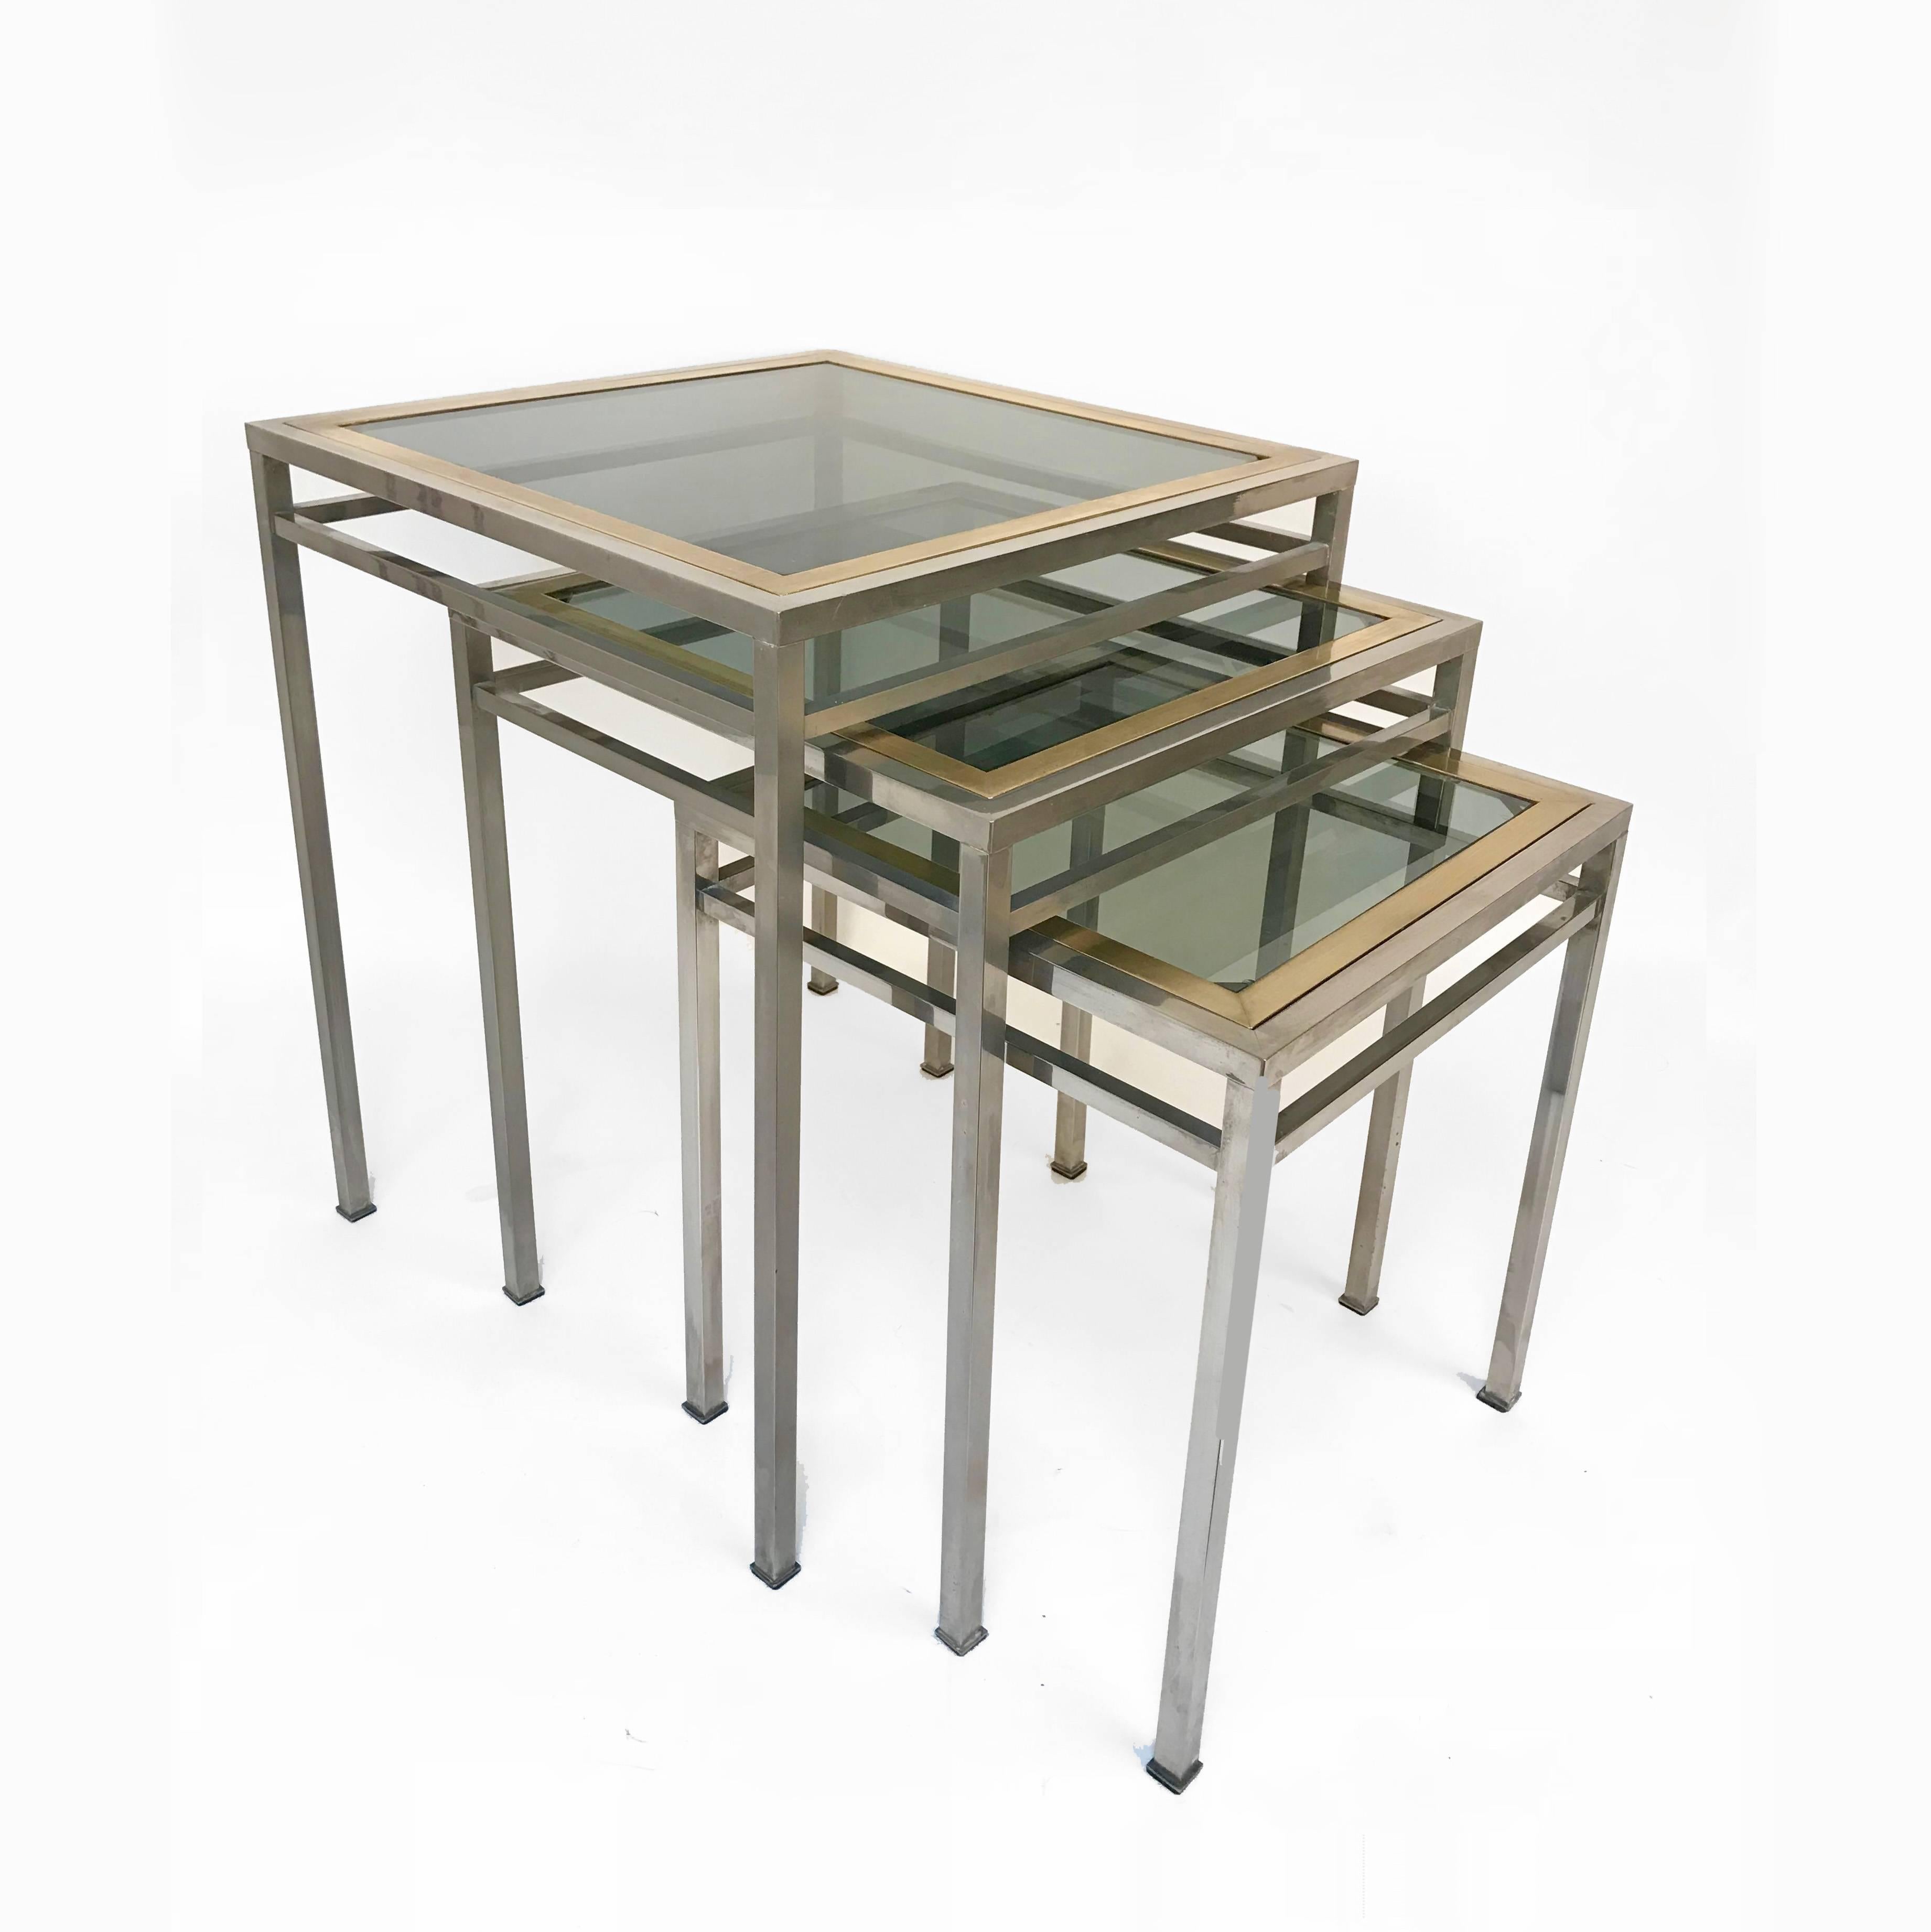 Three wonderful nesting tables in brass and crystal glass. This incredible set was produced in Italy during the 1970s.

These three tables are an iconic example of Mid-Century Modern lines and material, with the perfect integration of the smoked